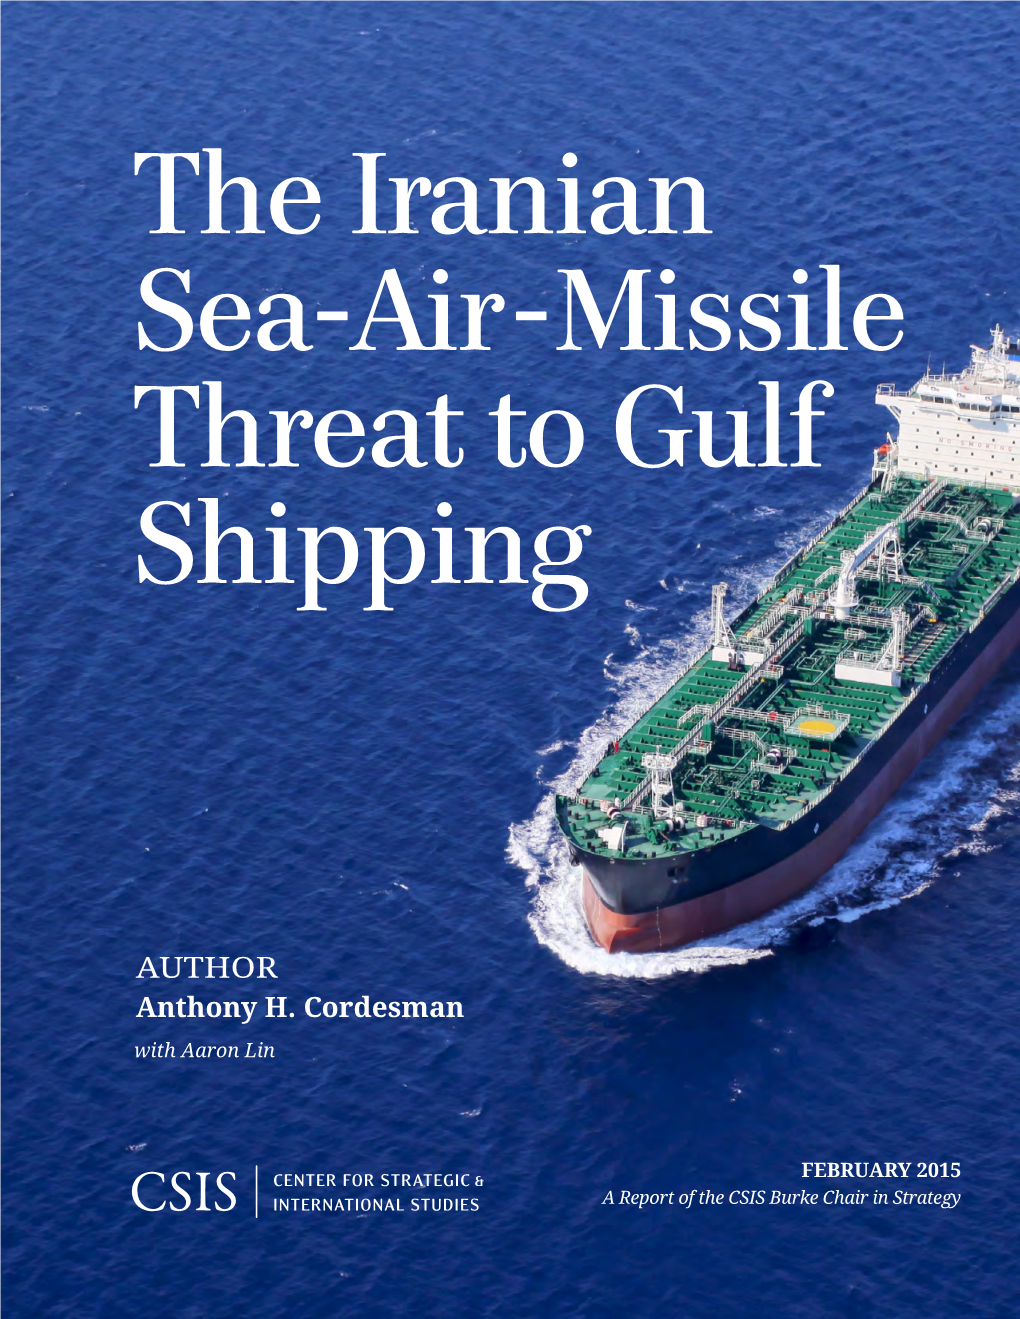 The Iranian Sea-Air-Missile Threat to Gulf Shipping Washington, DC 20036 202-887-0200 | the Iranian Sea-Air-Missile Lanham • Boulder • New York • London